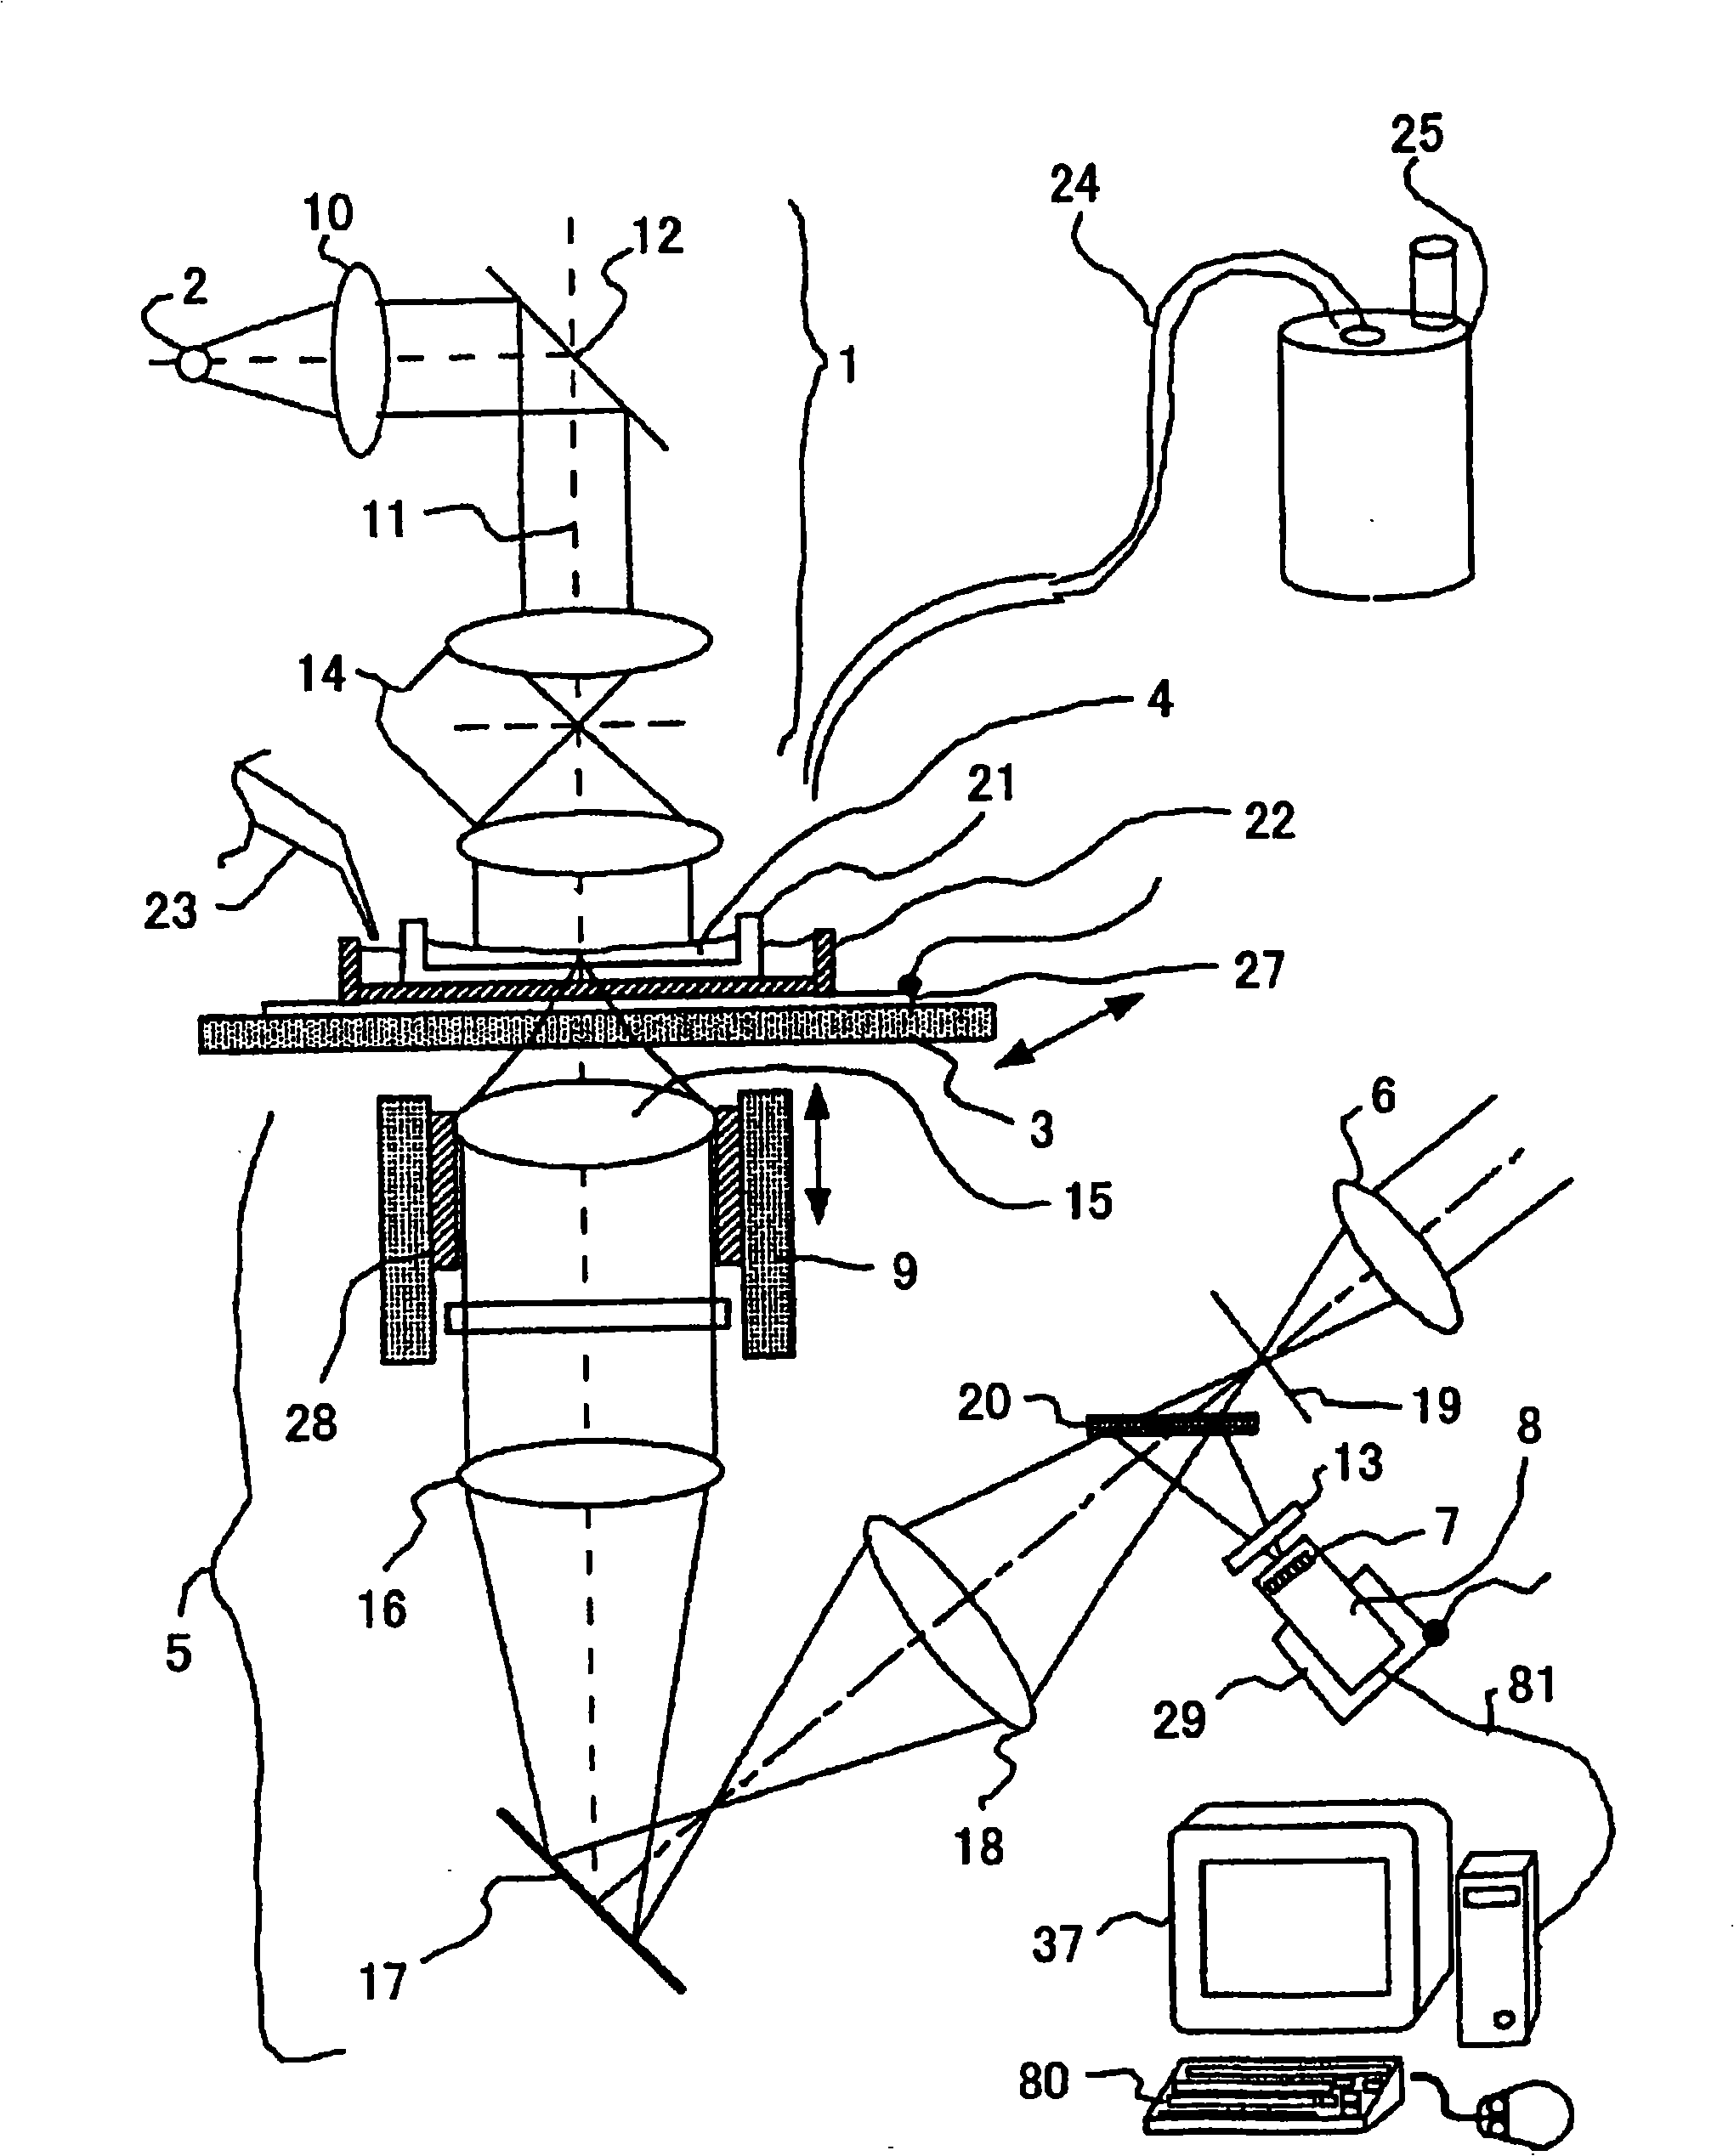 Device and method for capturing image of a sample originating from organism